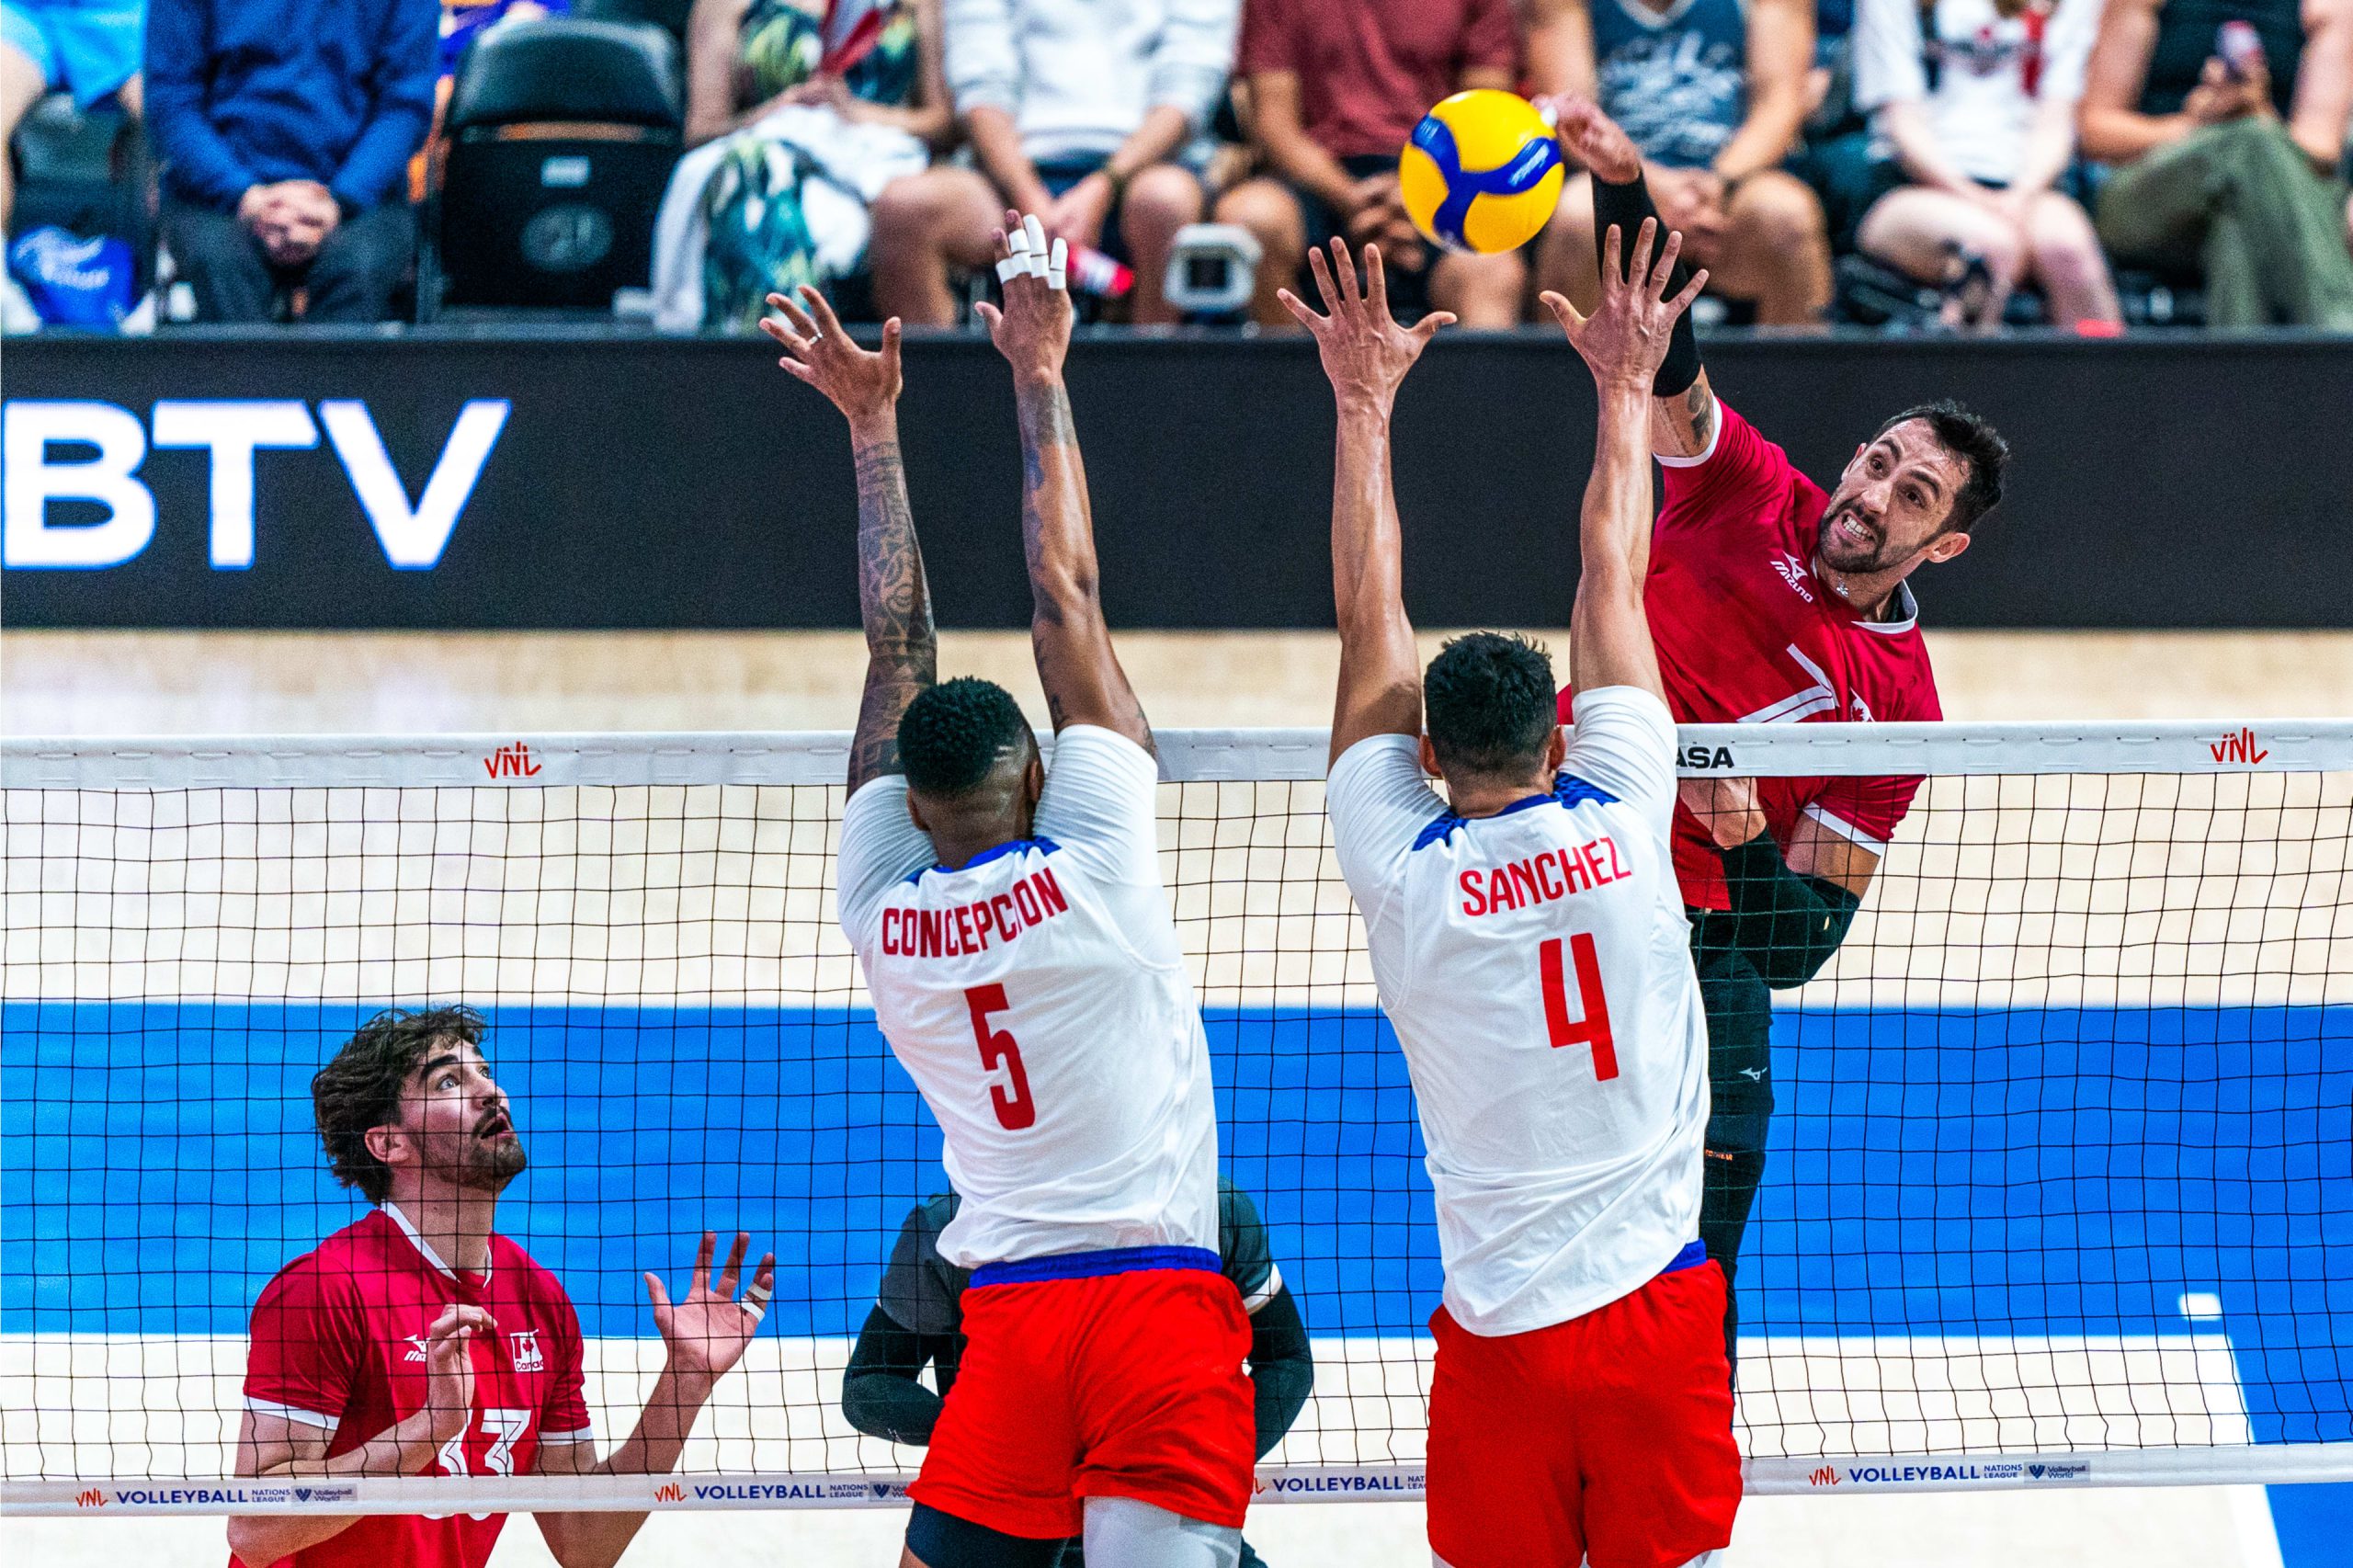 Canada opens VNL in Ottawa with 3-1 win over Cuba